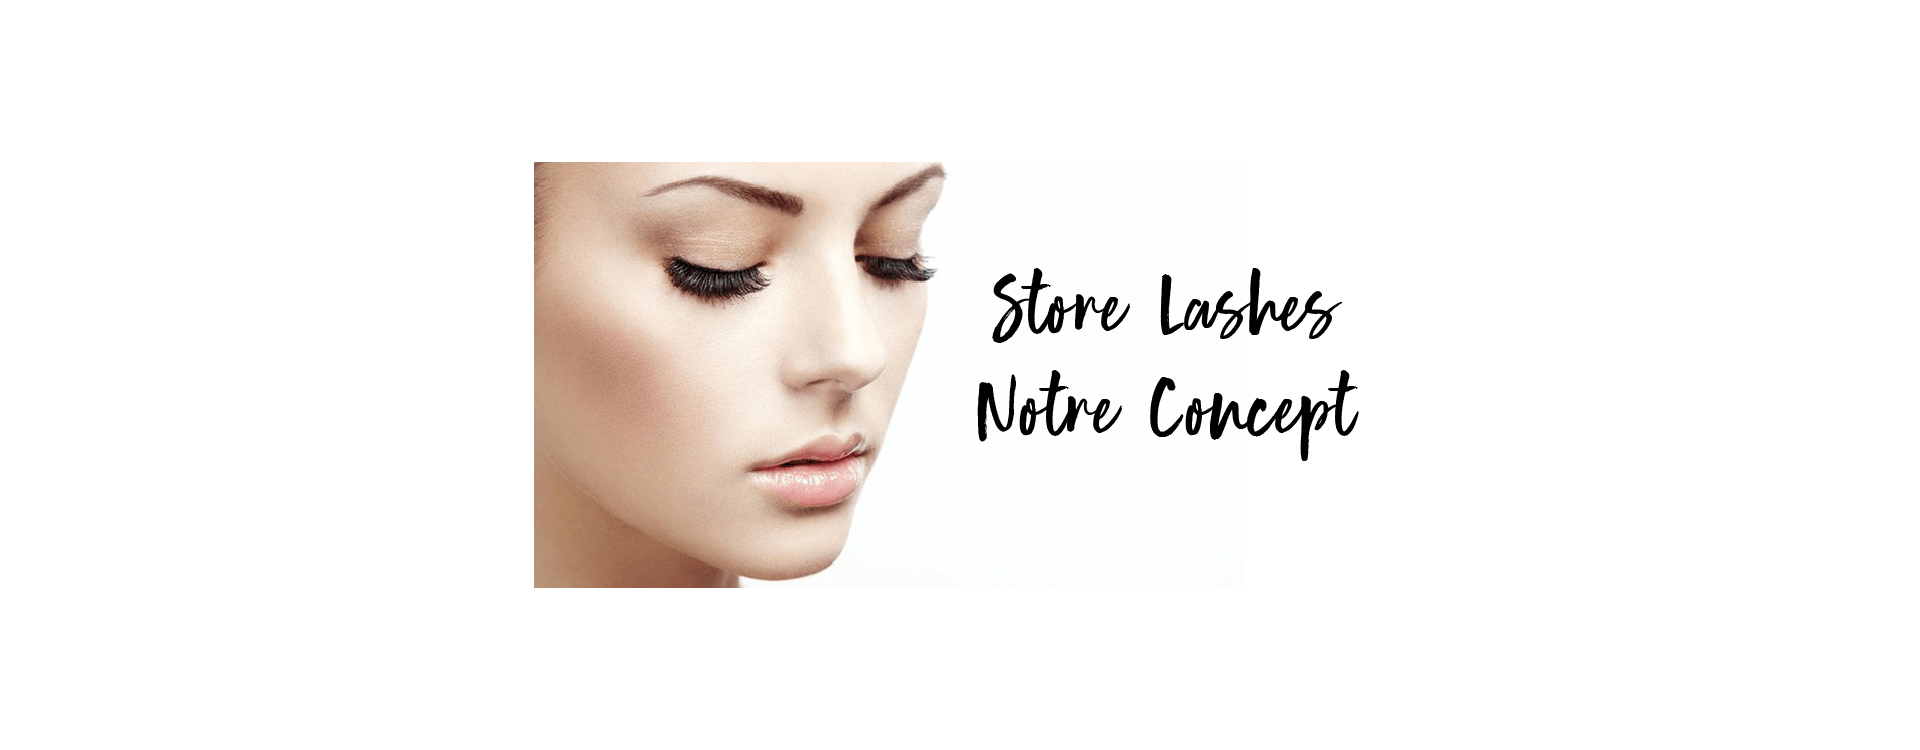 STORE LASHES: OUR CONCEPT